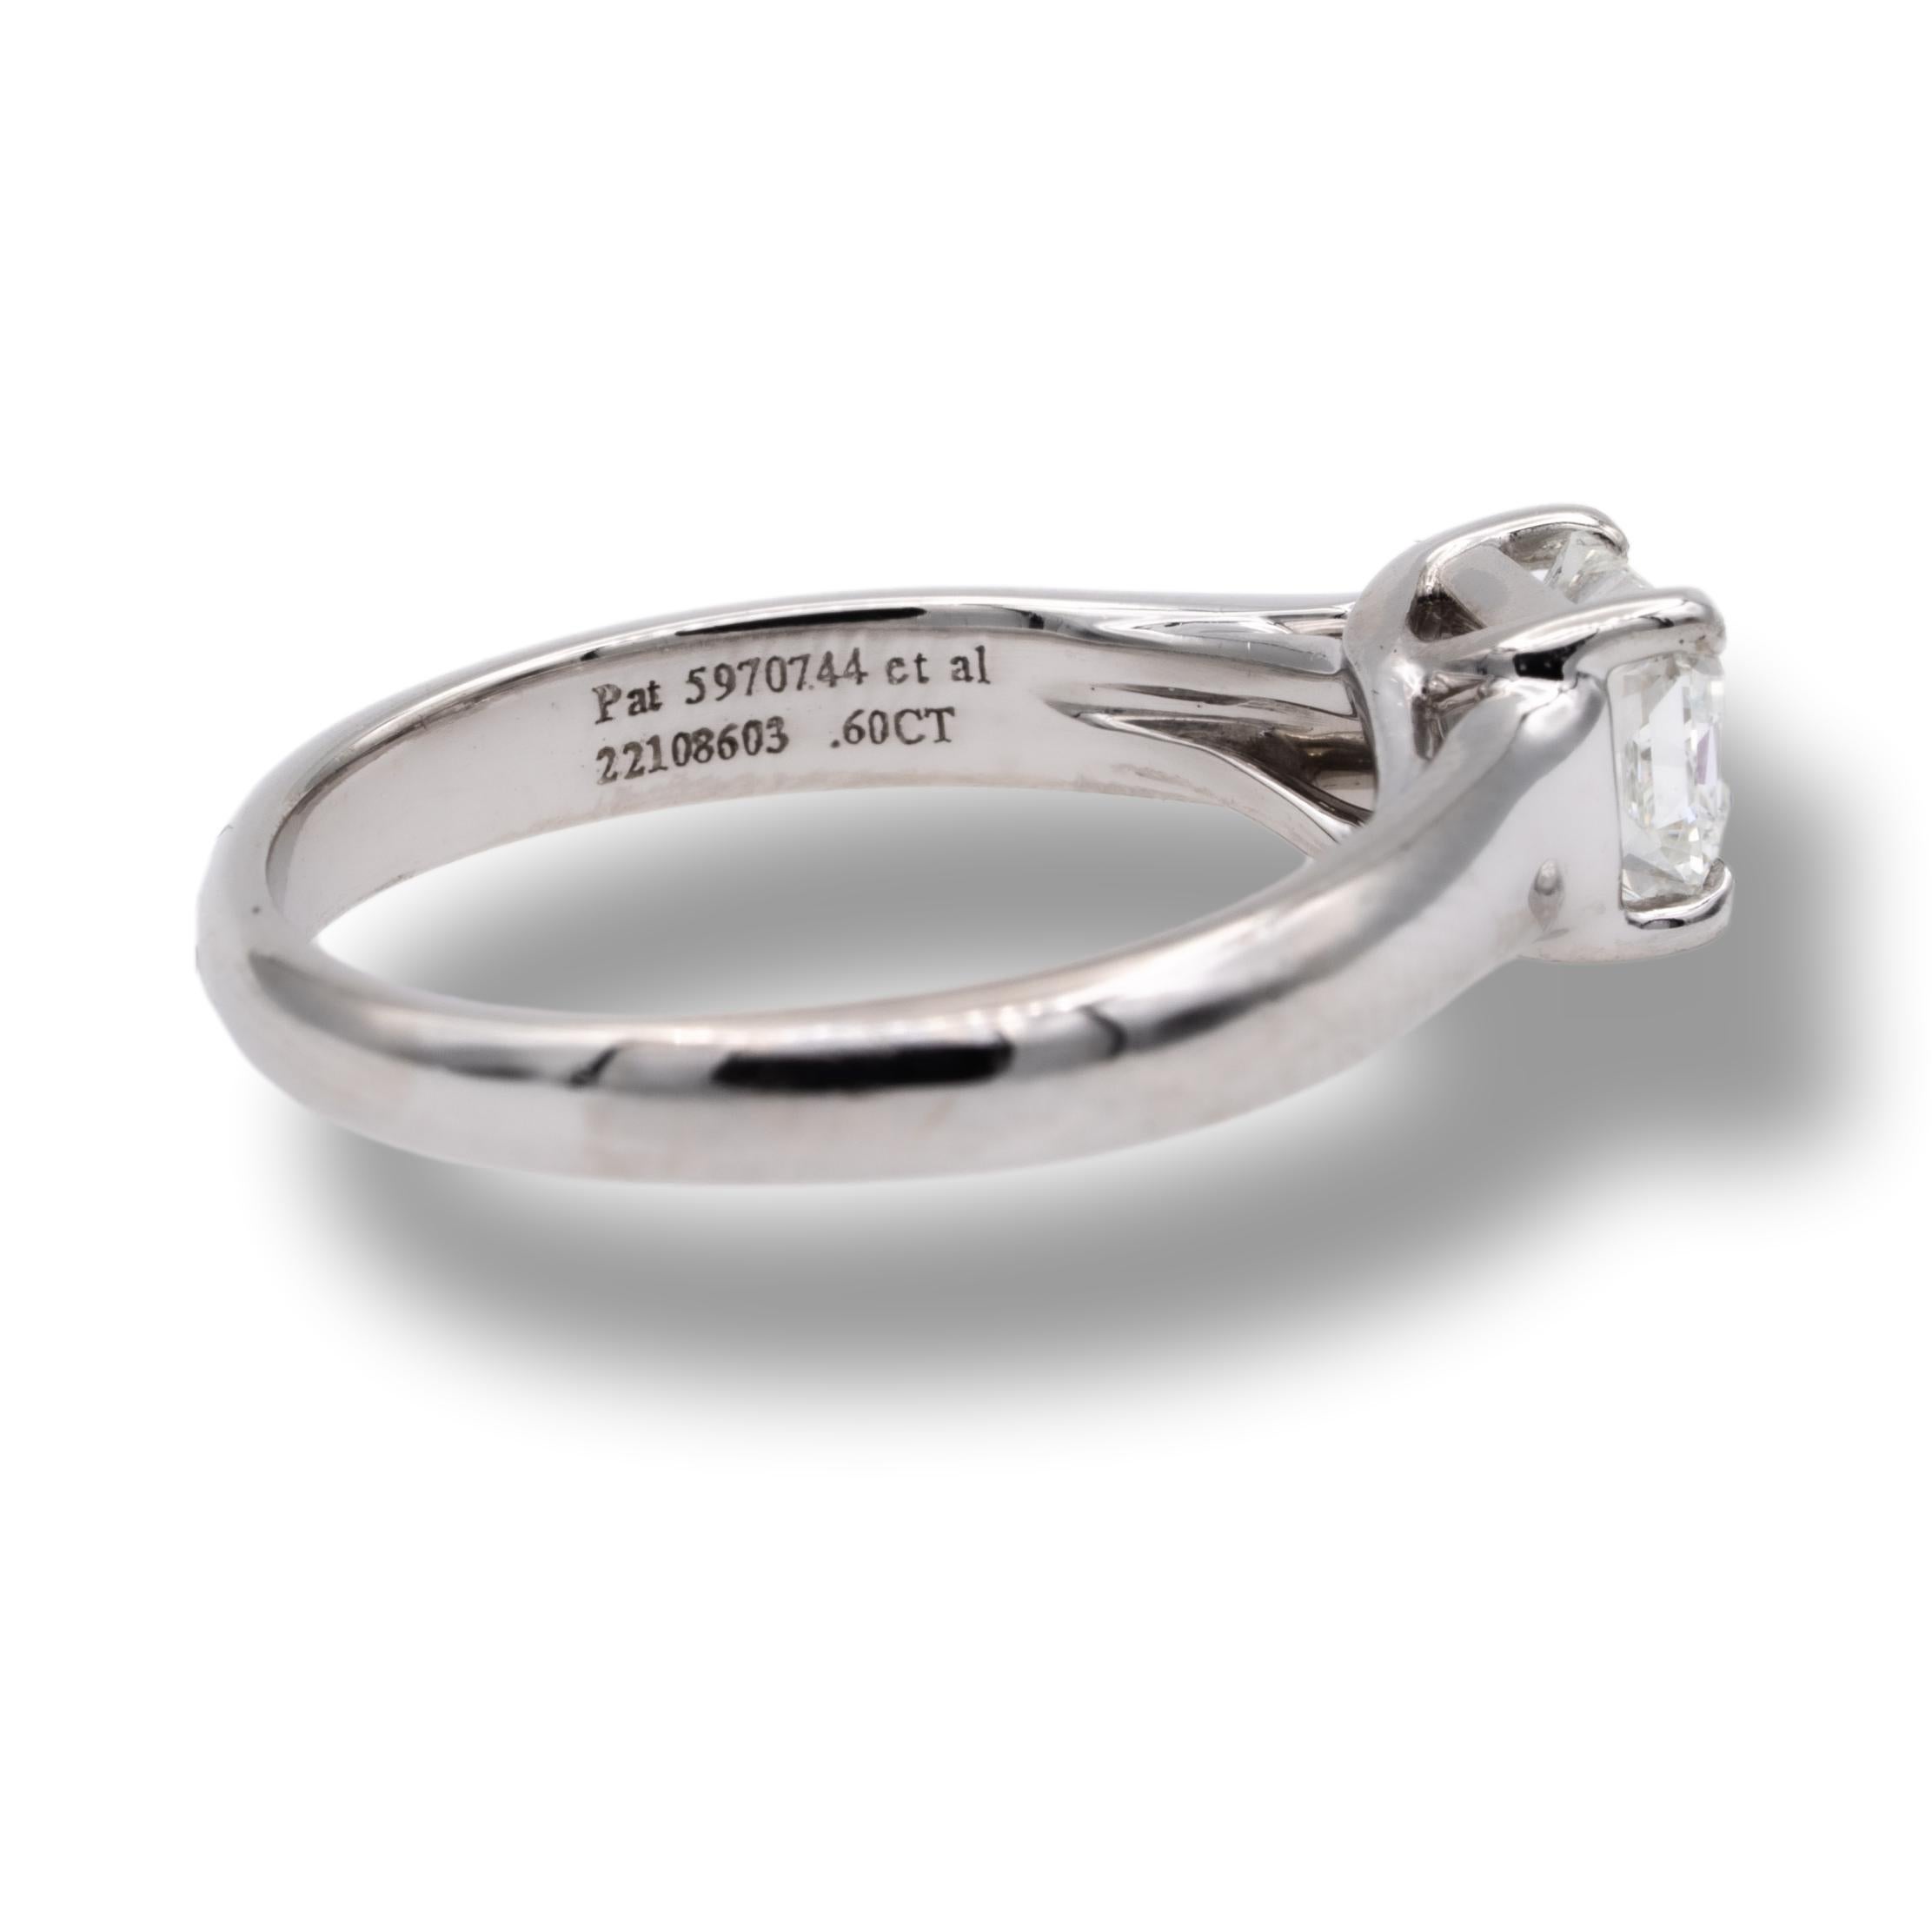 Tiffany & Co Lucida engagement ring with 0.60 carat center H color VVS2 clarity finely crafted in Platinum.  This ring would retail today at $6,200 based on Tiffany True cut pricing

Ring Specifications
Brand: Tiffany & Co.
Hallmark: Tiffany & Co ©